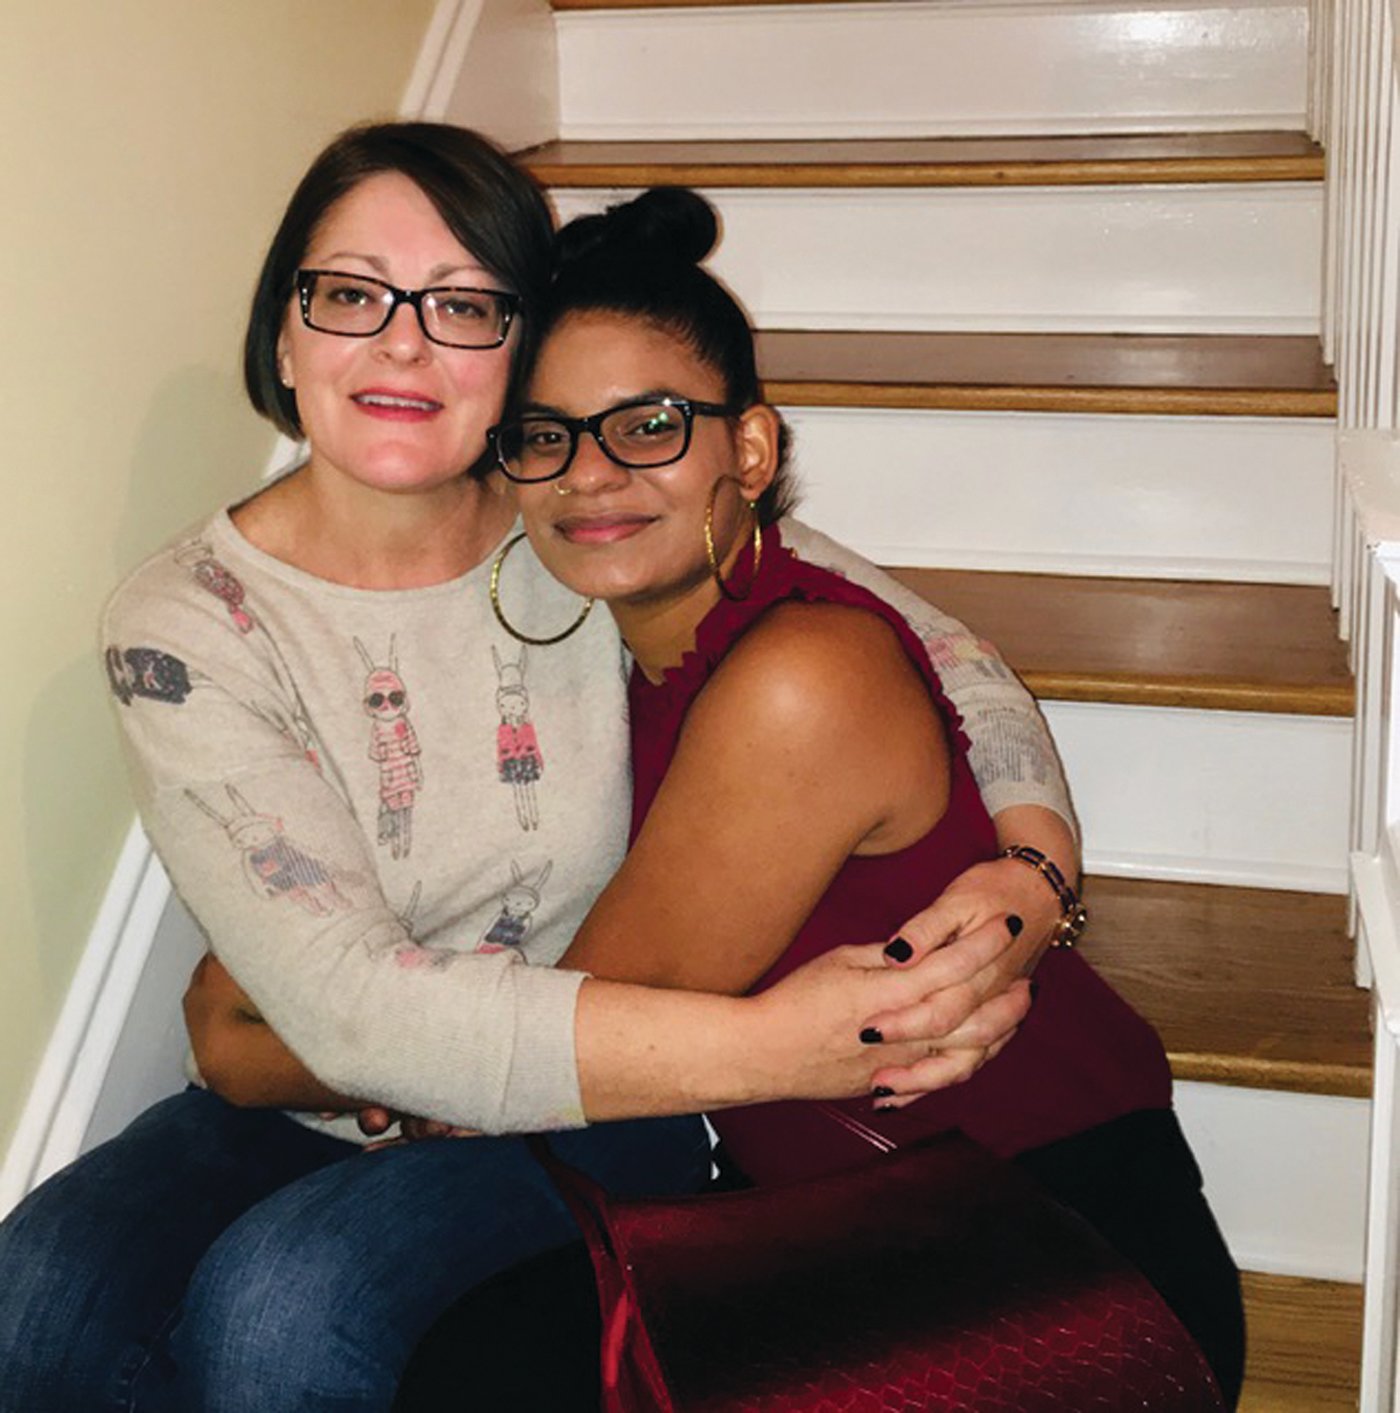 HUG FOR MOM: Fer Teresa Breto Johndrow steals a hug from her foster mother, Candace, in February. The pair had been eagerly awaiting Fer’s adoption at age 21, which took place remotely on Aug. 27.